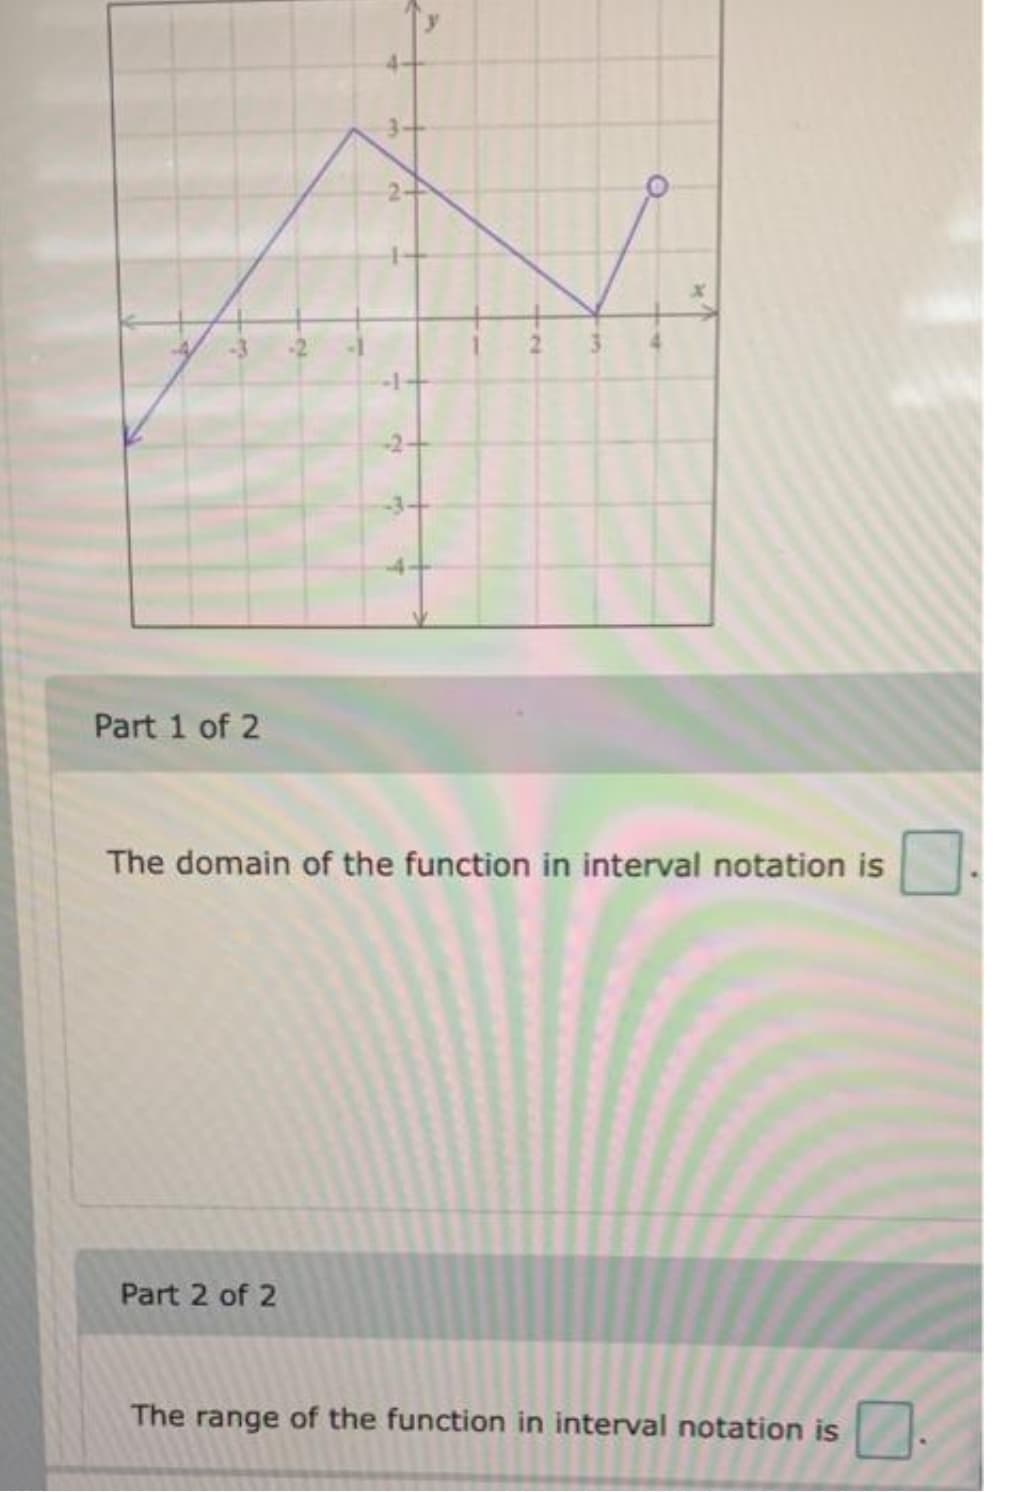 -2-
Part 1 of 2
The domain of the function in interval notation is
Part 2 of 2
The range of the function in interval notation is
